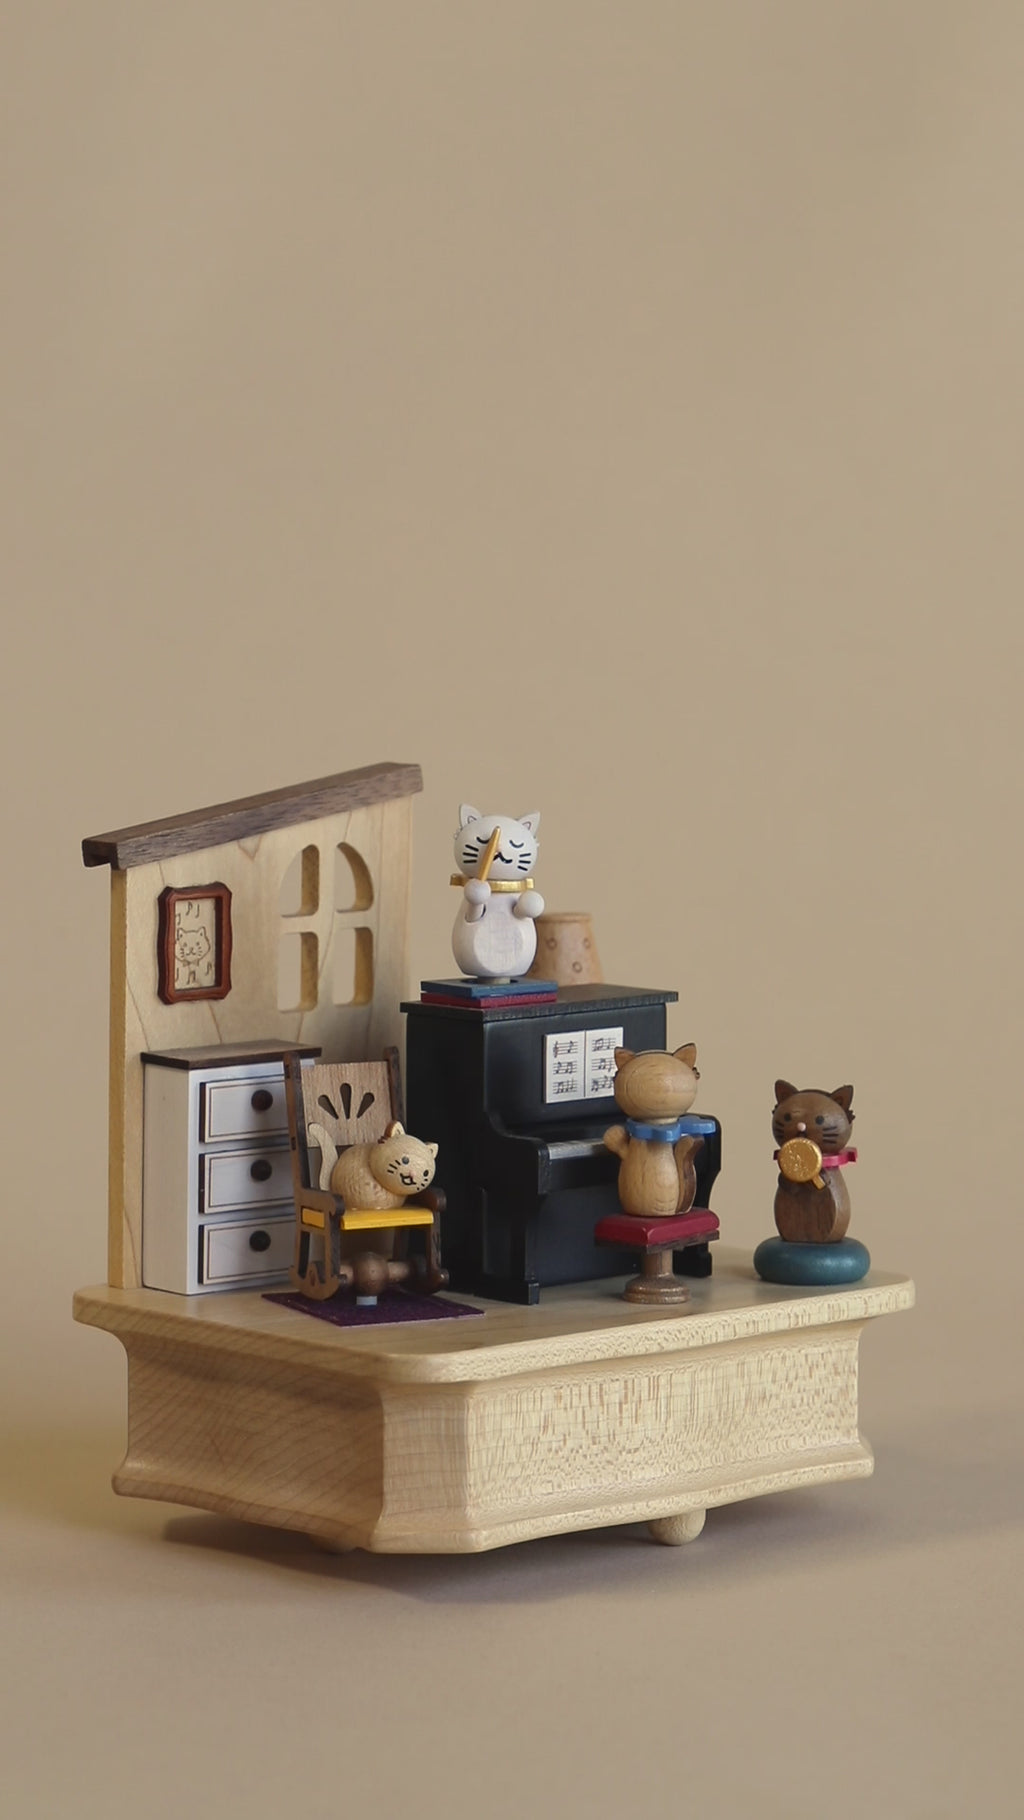 Wooden music box with cats playing the piano